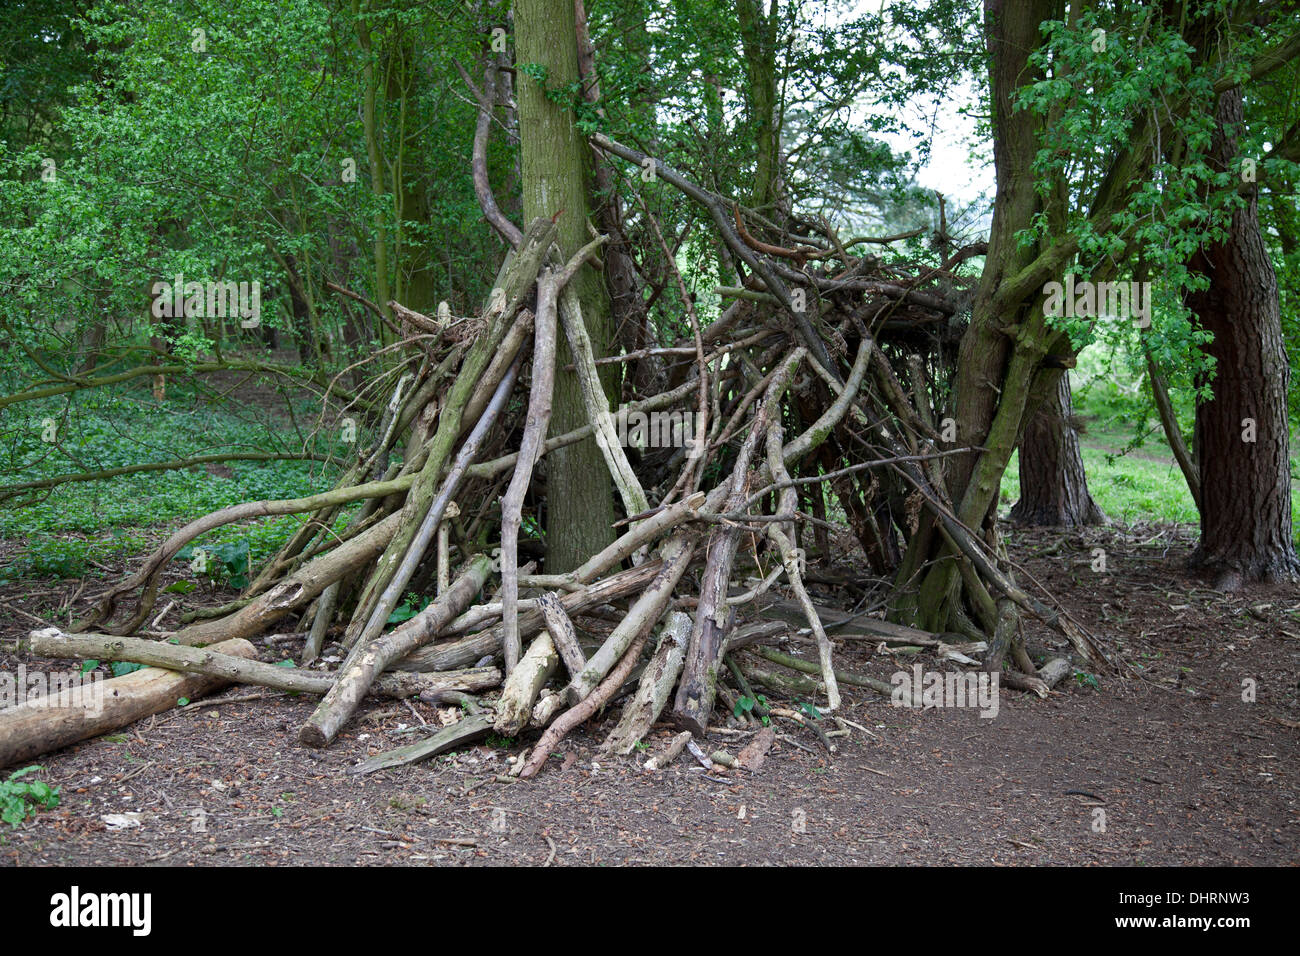 Children's den or tent made of discarded branches Stock Photo